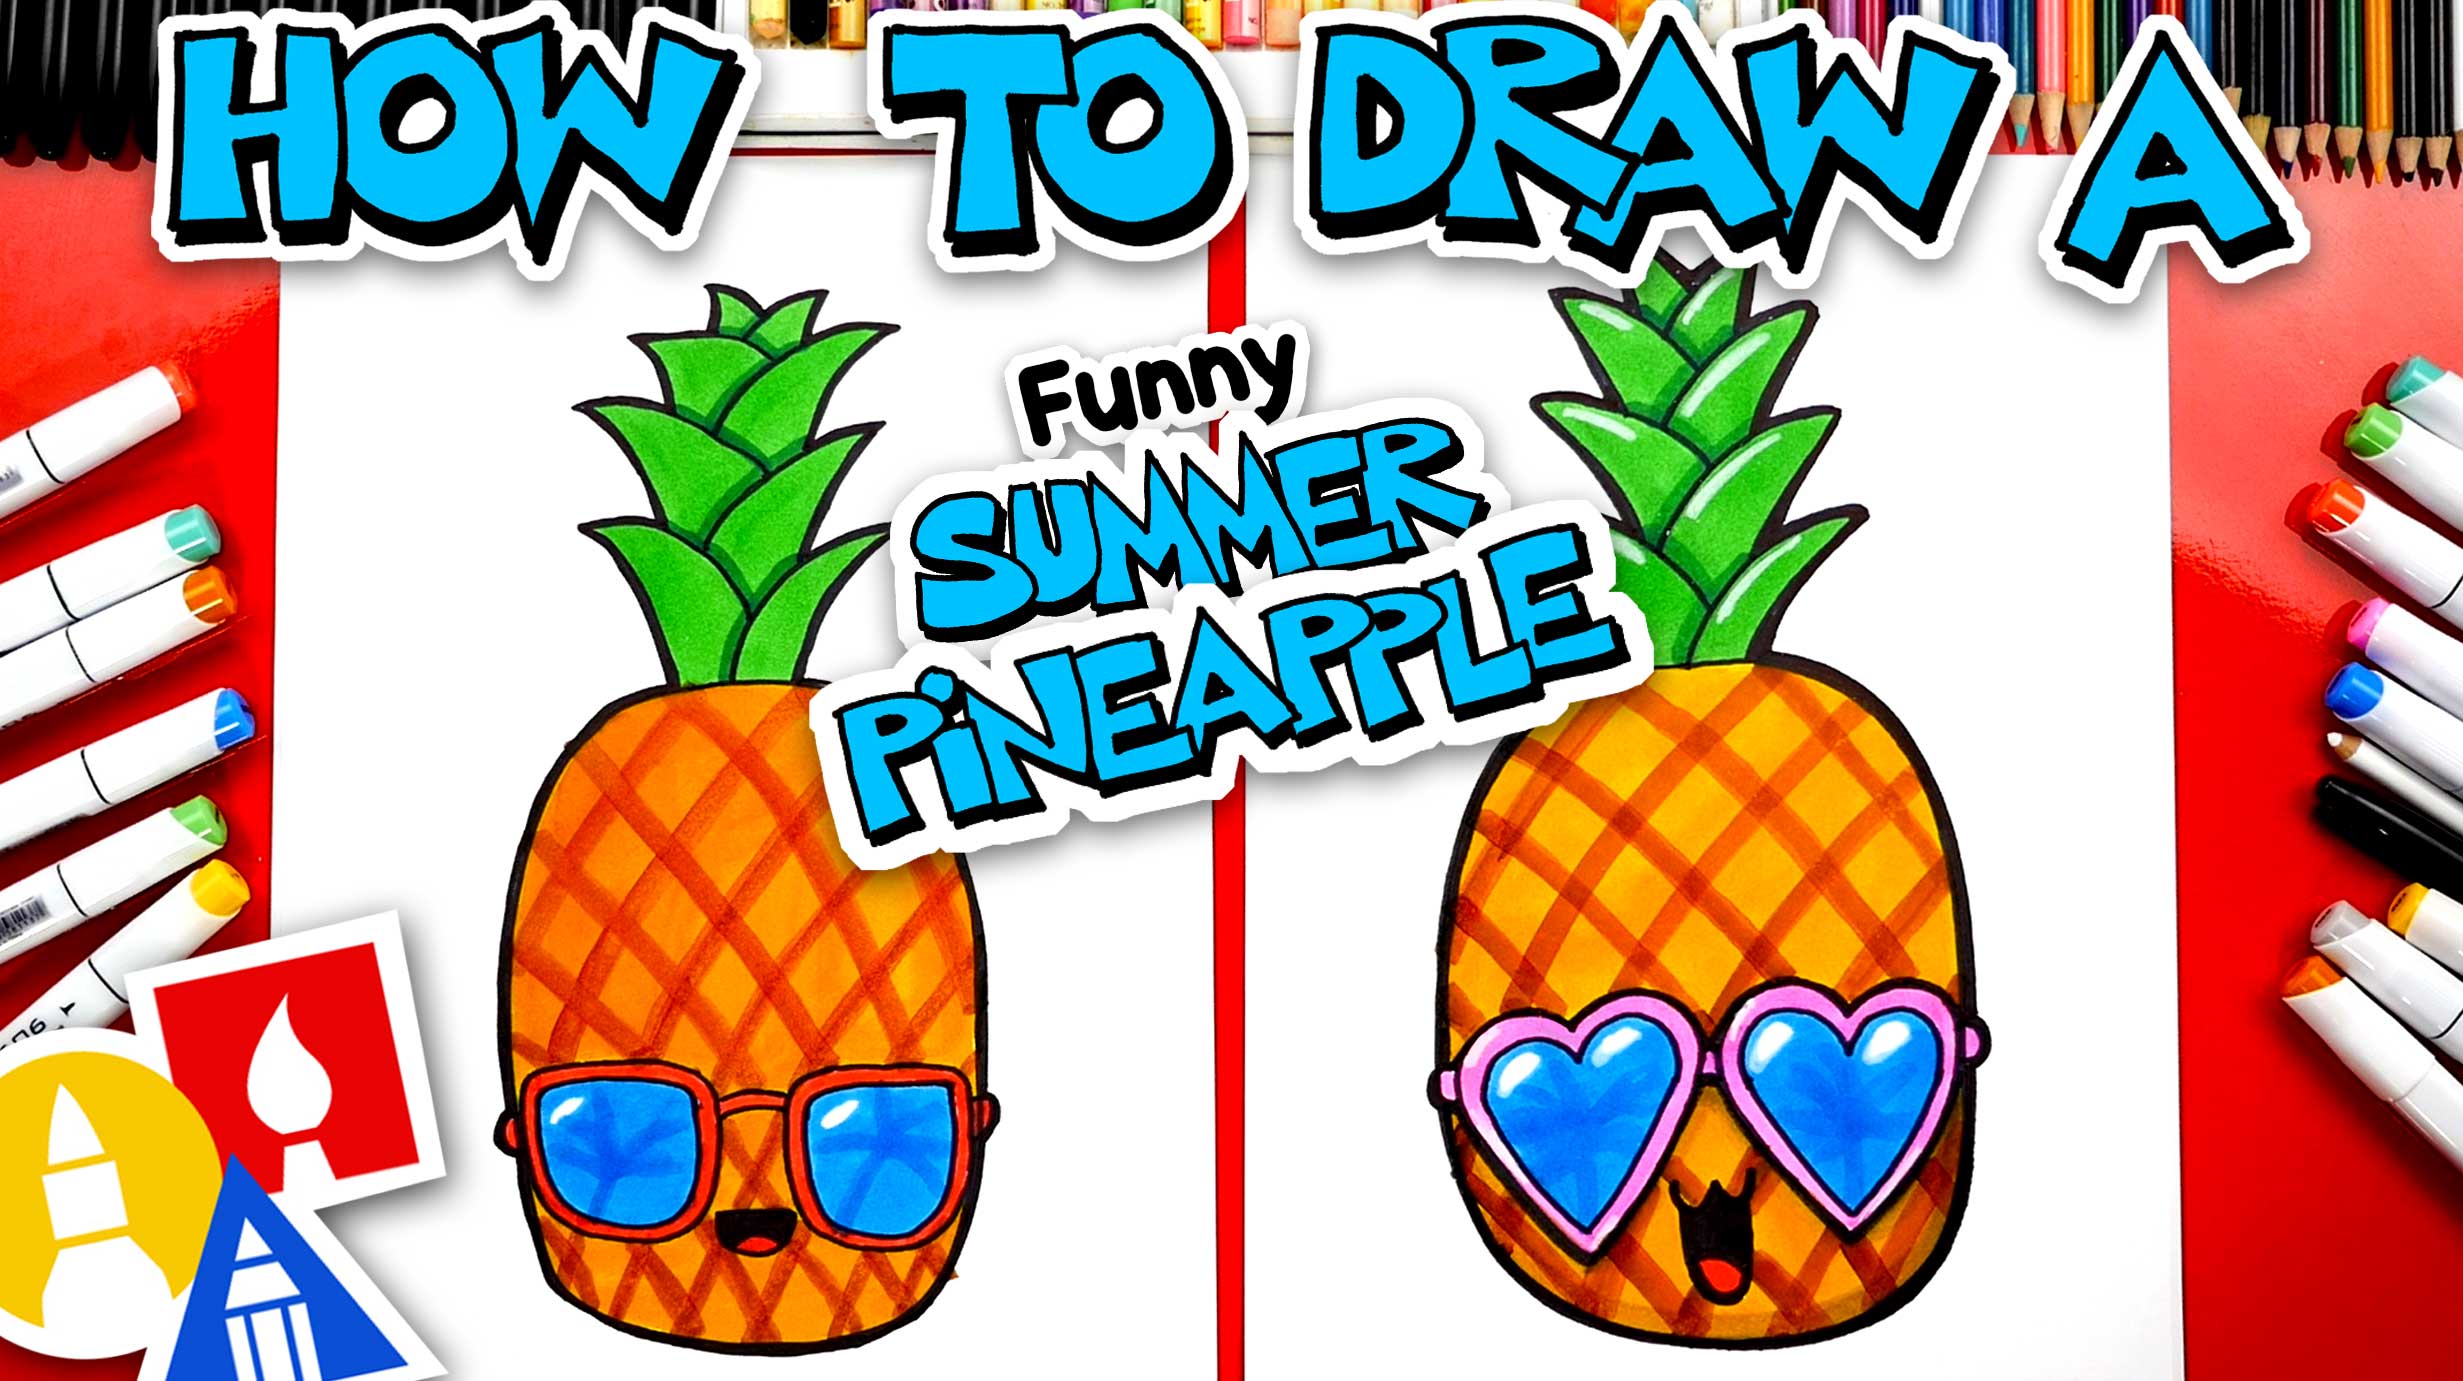 How To Draw A Funny Summer Pineapple Art For Kids Hub